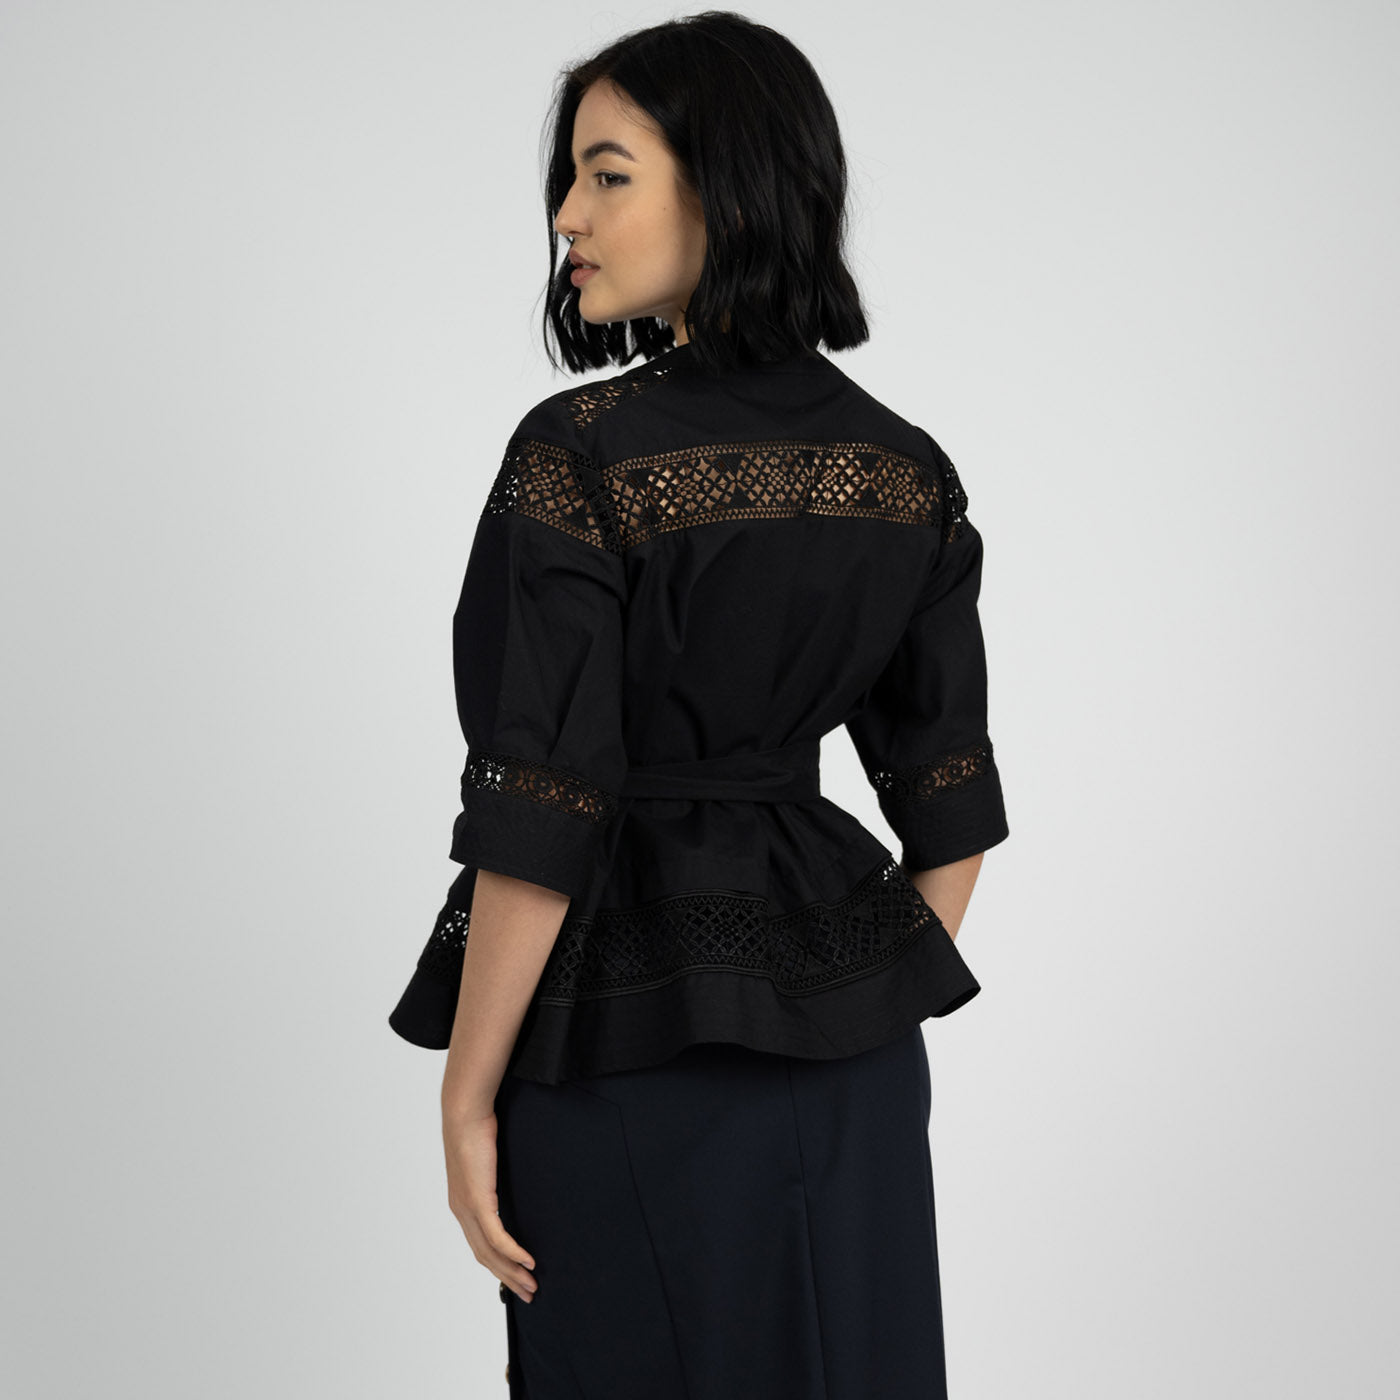 “Mara” Black  Belted Lace Blouse